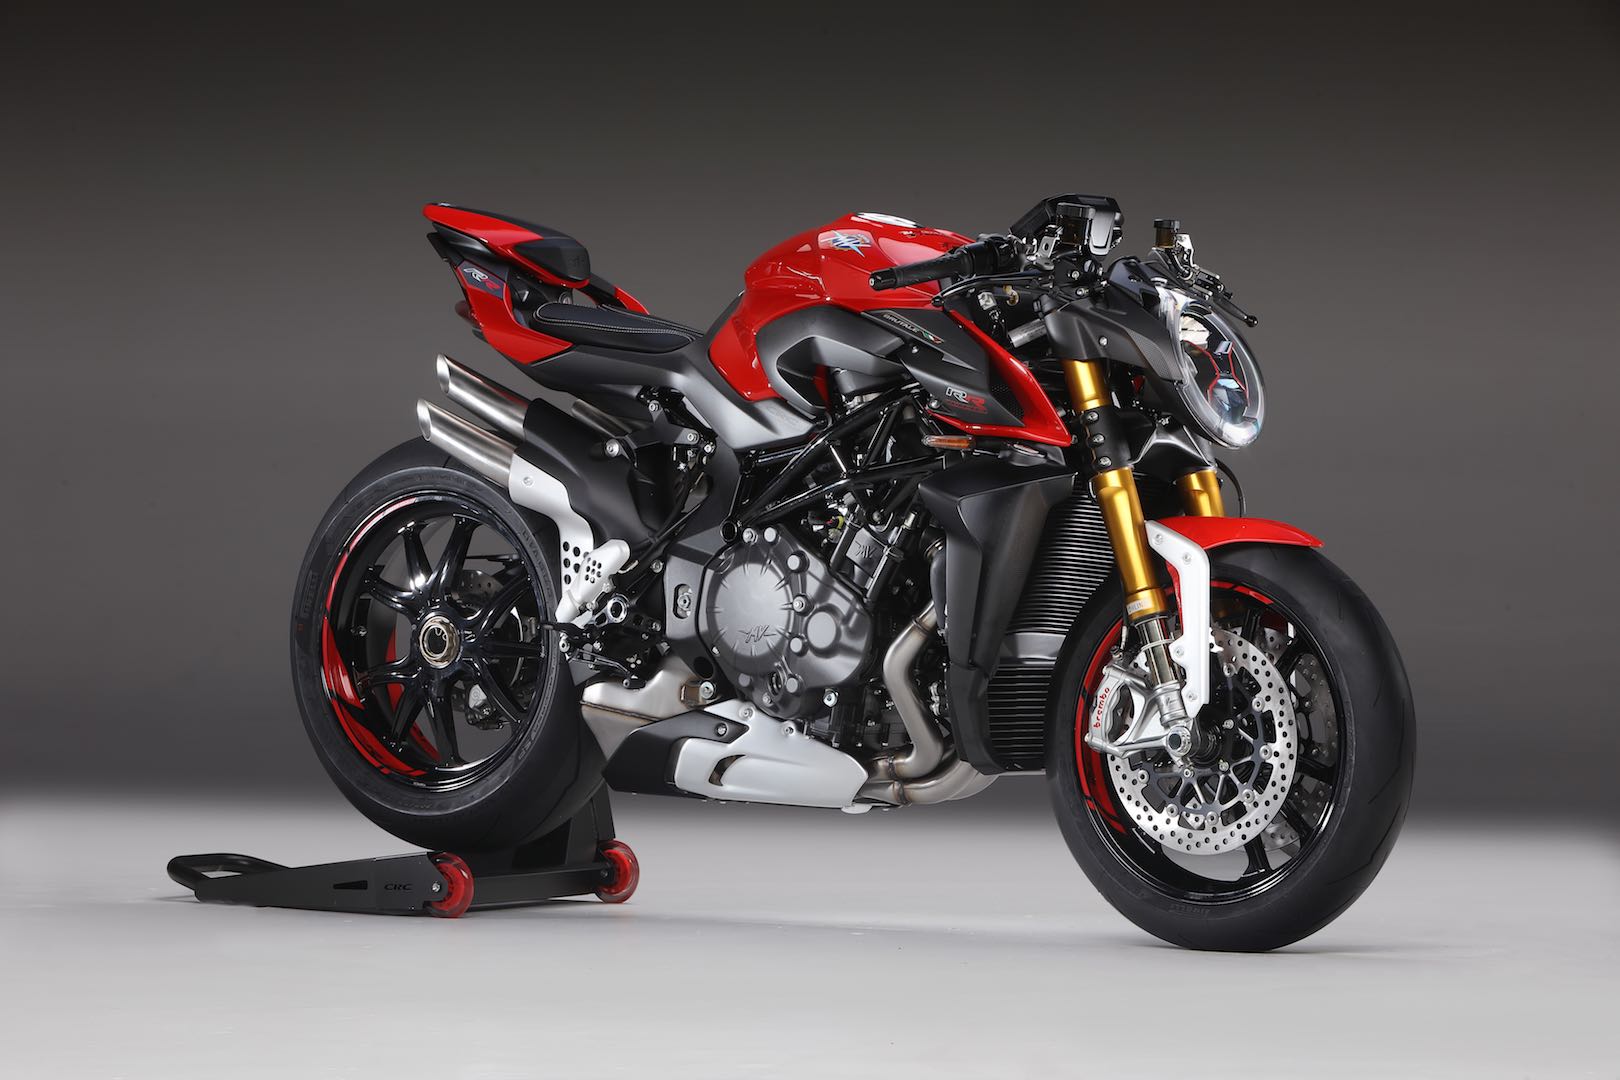 2019 MV Augusta F4 RR Motorcycle UAEs Prices, Specs 